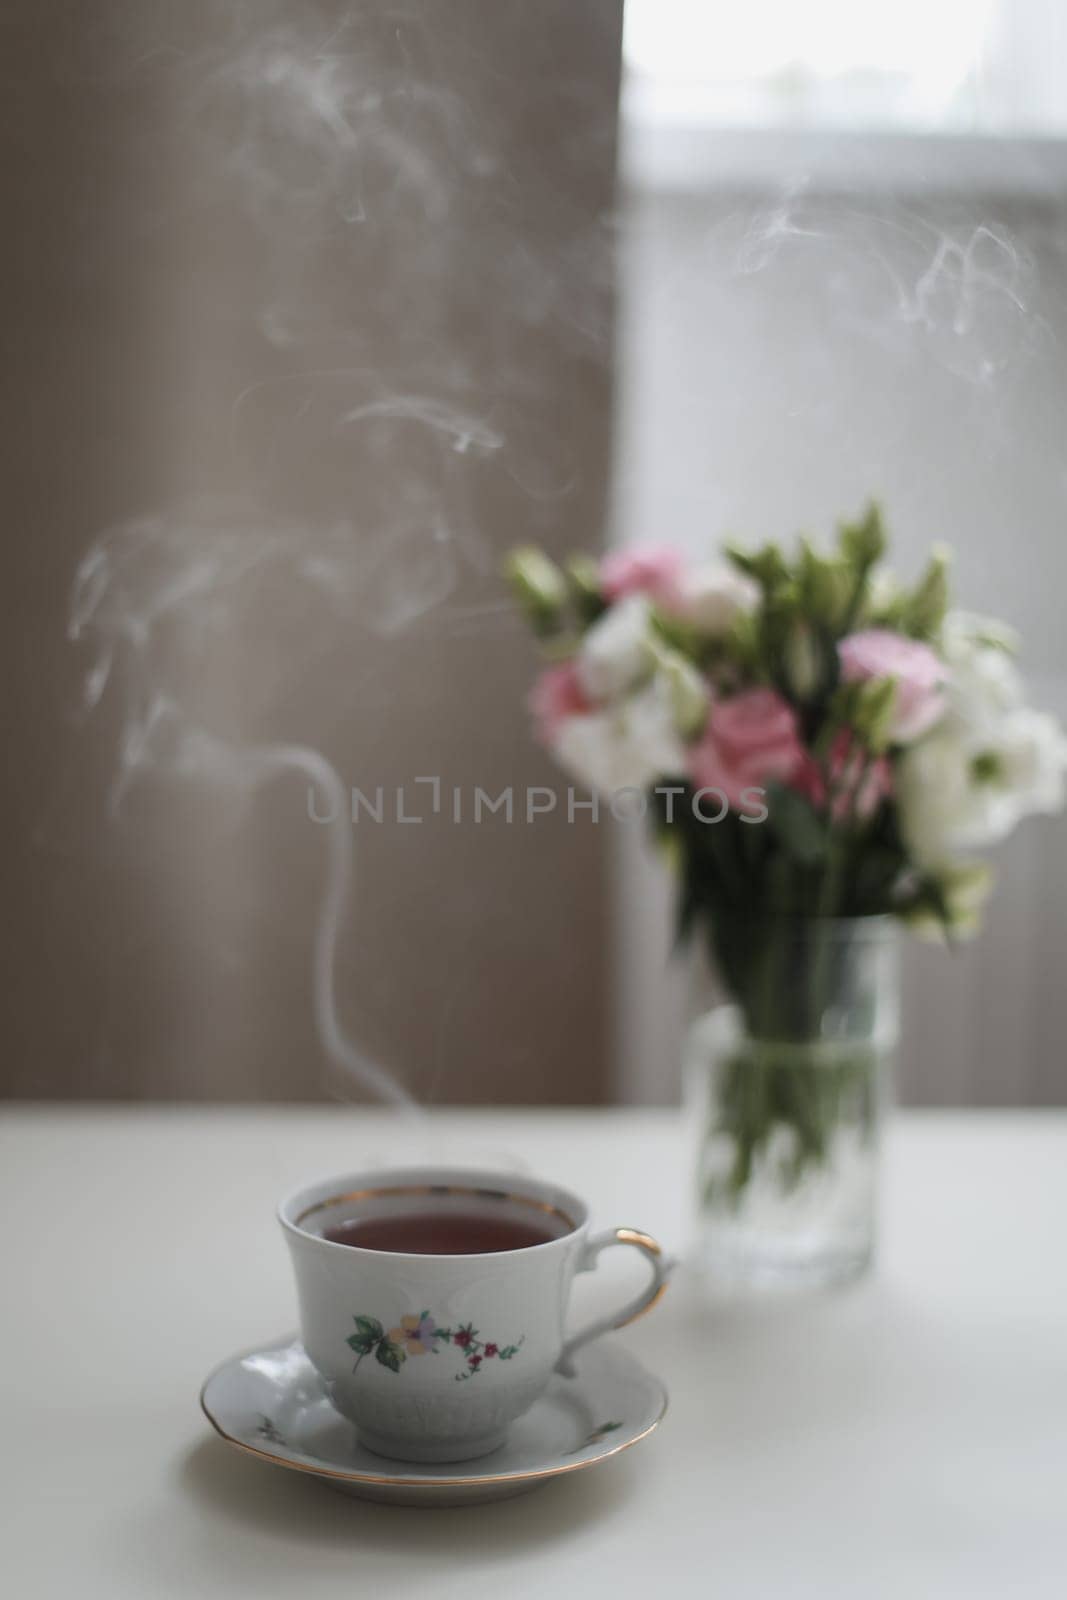 Home still life scene. Cup of coffee or tea with flowers. Vintage feminine styled photo. Floral composition, pink and white roses